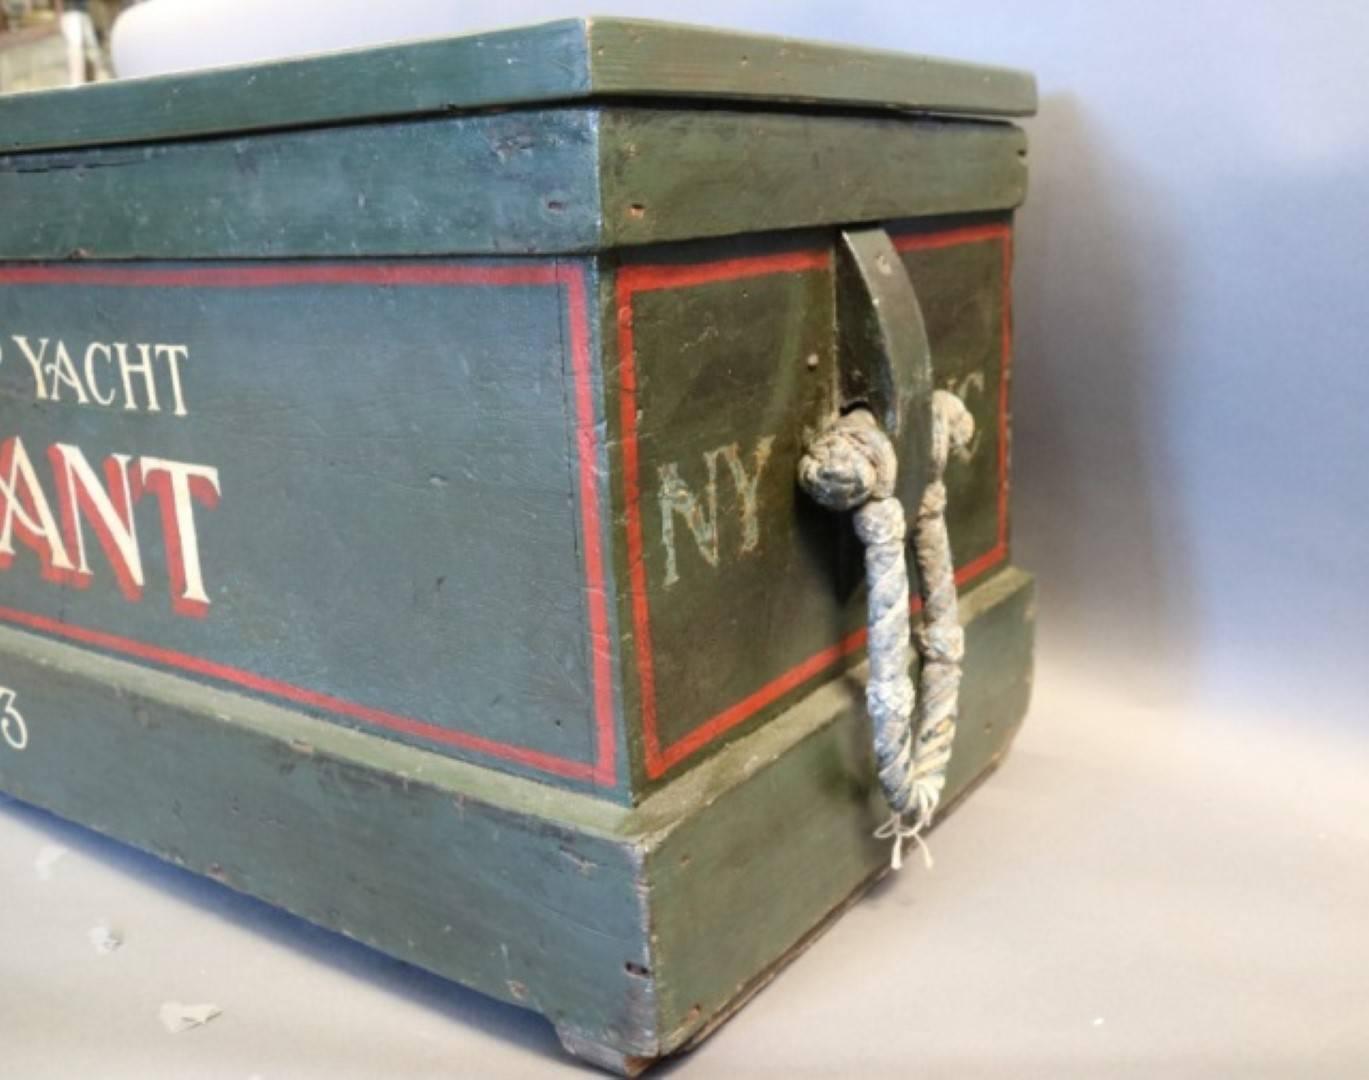 Sea chest in green paint with red trim and later painted decoration with regard to "America's Cup yacht Vigilant". With a portrait of the yacht on the hinged lid. A fine pair of rope beckets are fitted to the ends of the